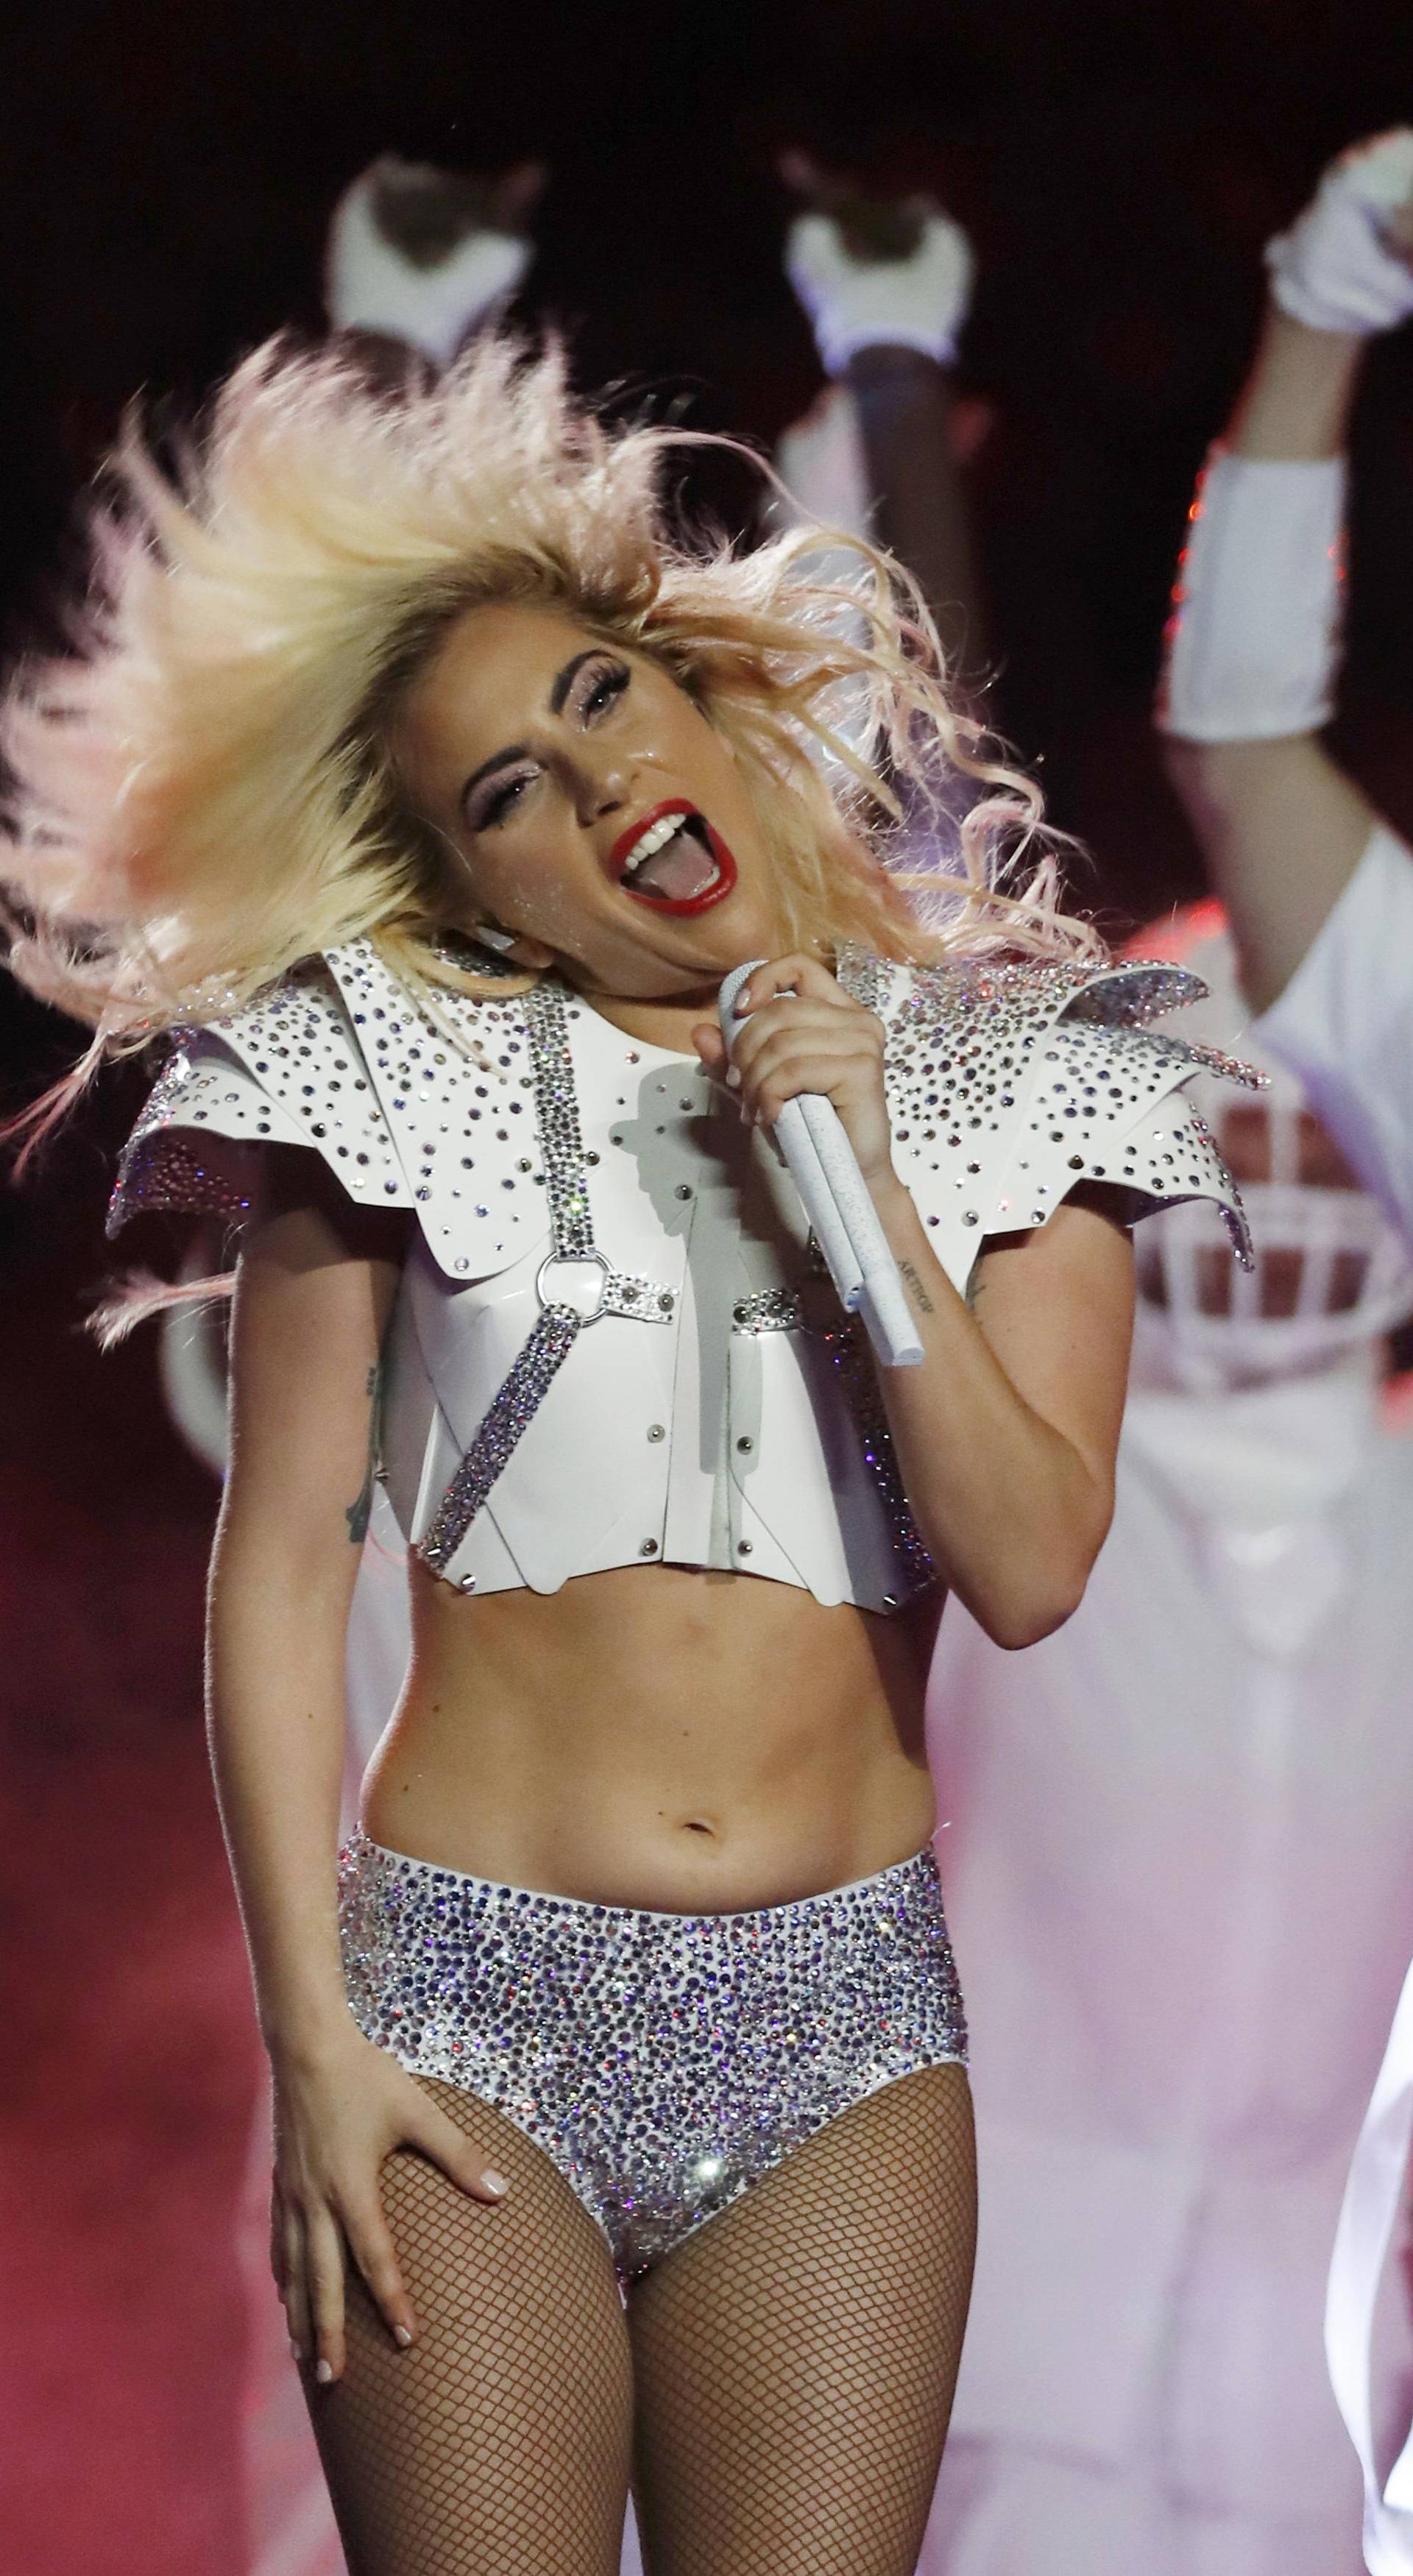 Singer Lady Gaga performs during the halftime show at Super Bowl LI between the New England Patriots and the Atlanta Falcons in Houston